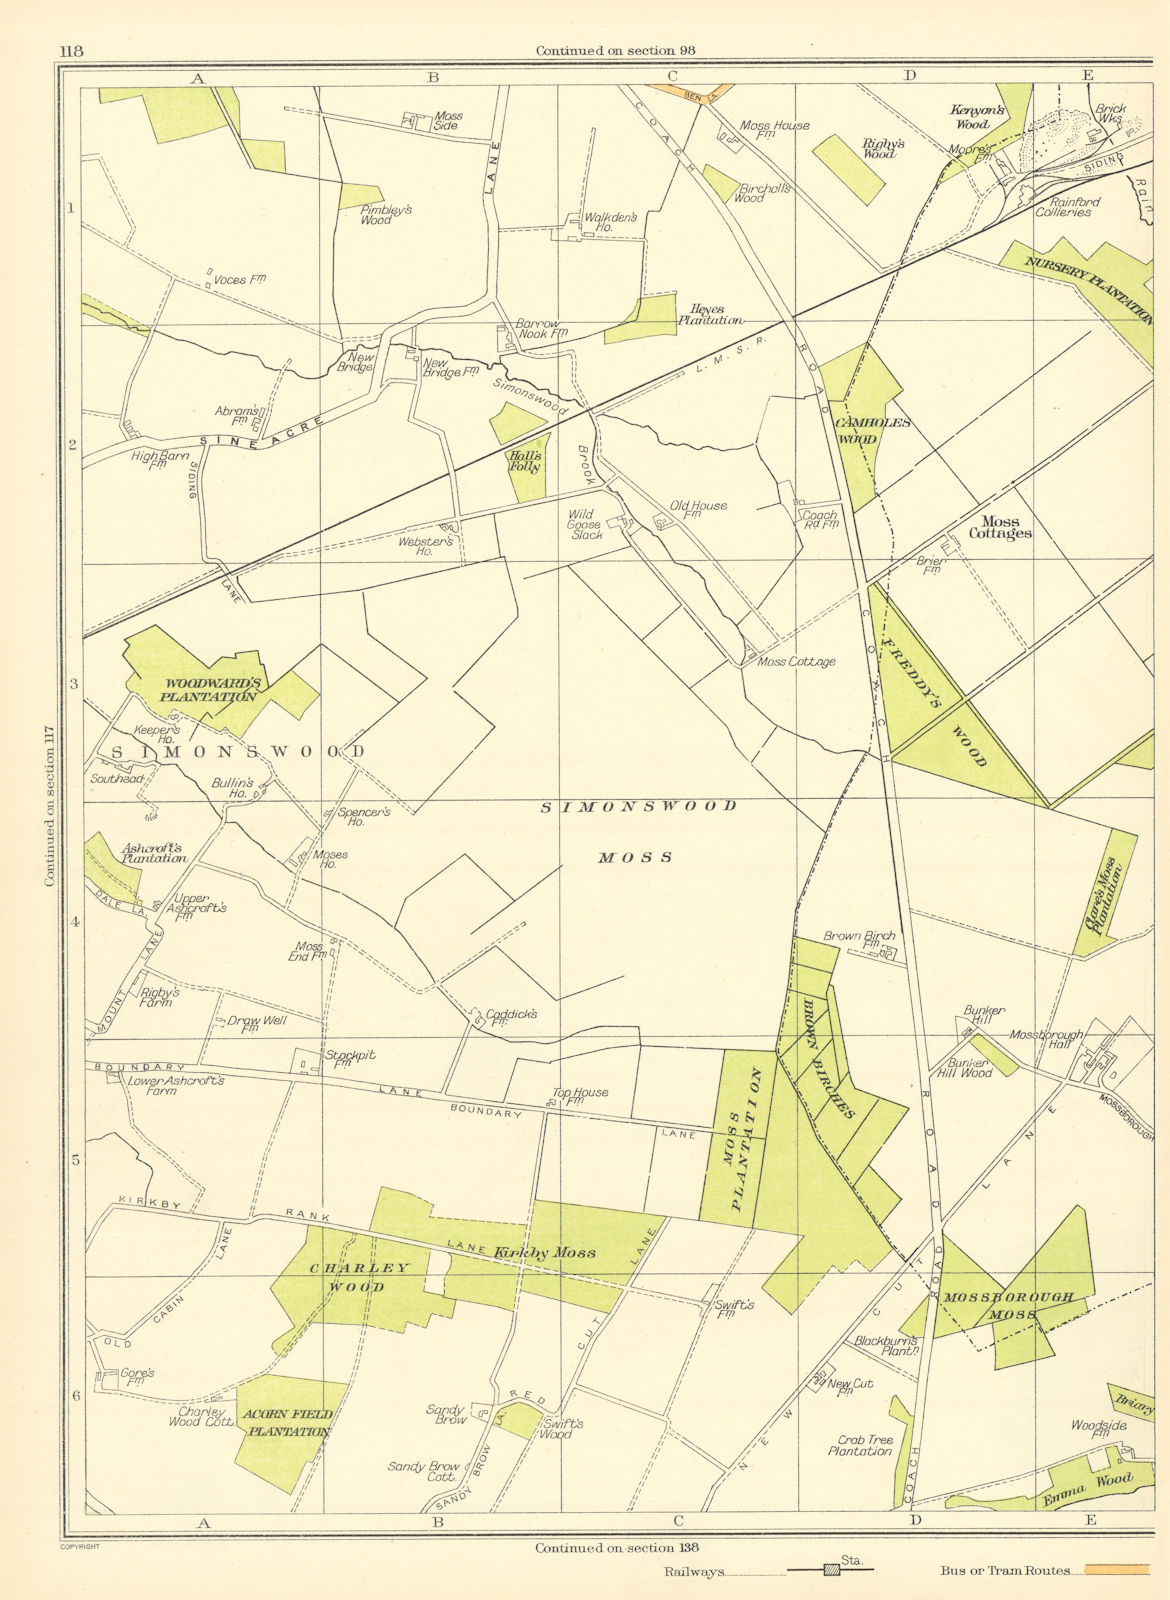 Netherton Bootle Lancs kennessee Verde 1935 Mapa Antiguo Melling incluso maghull 